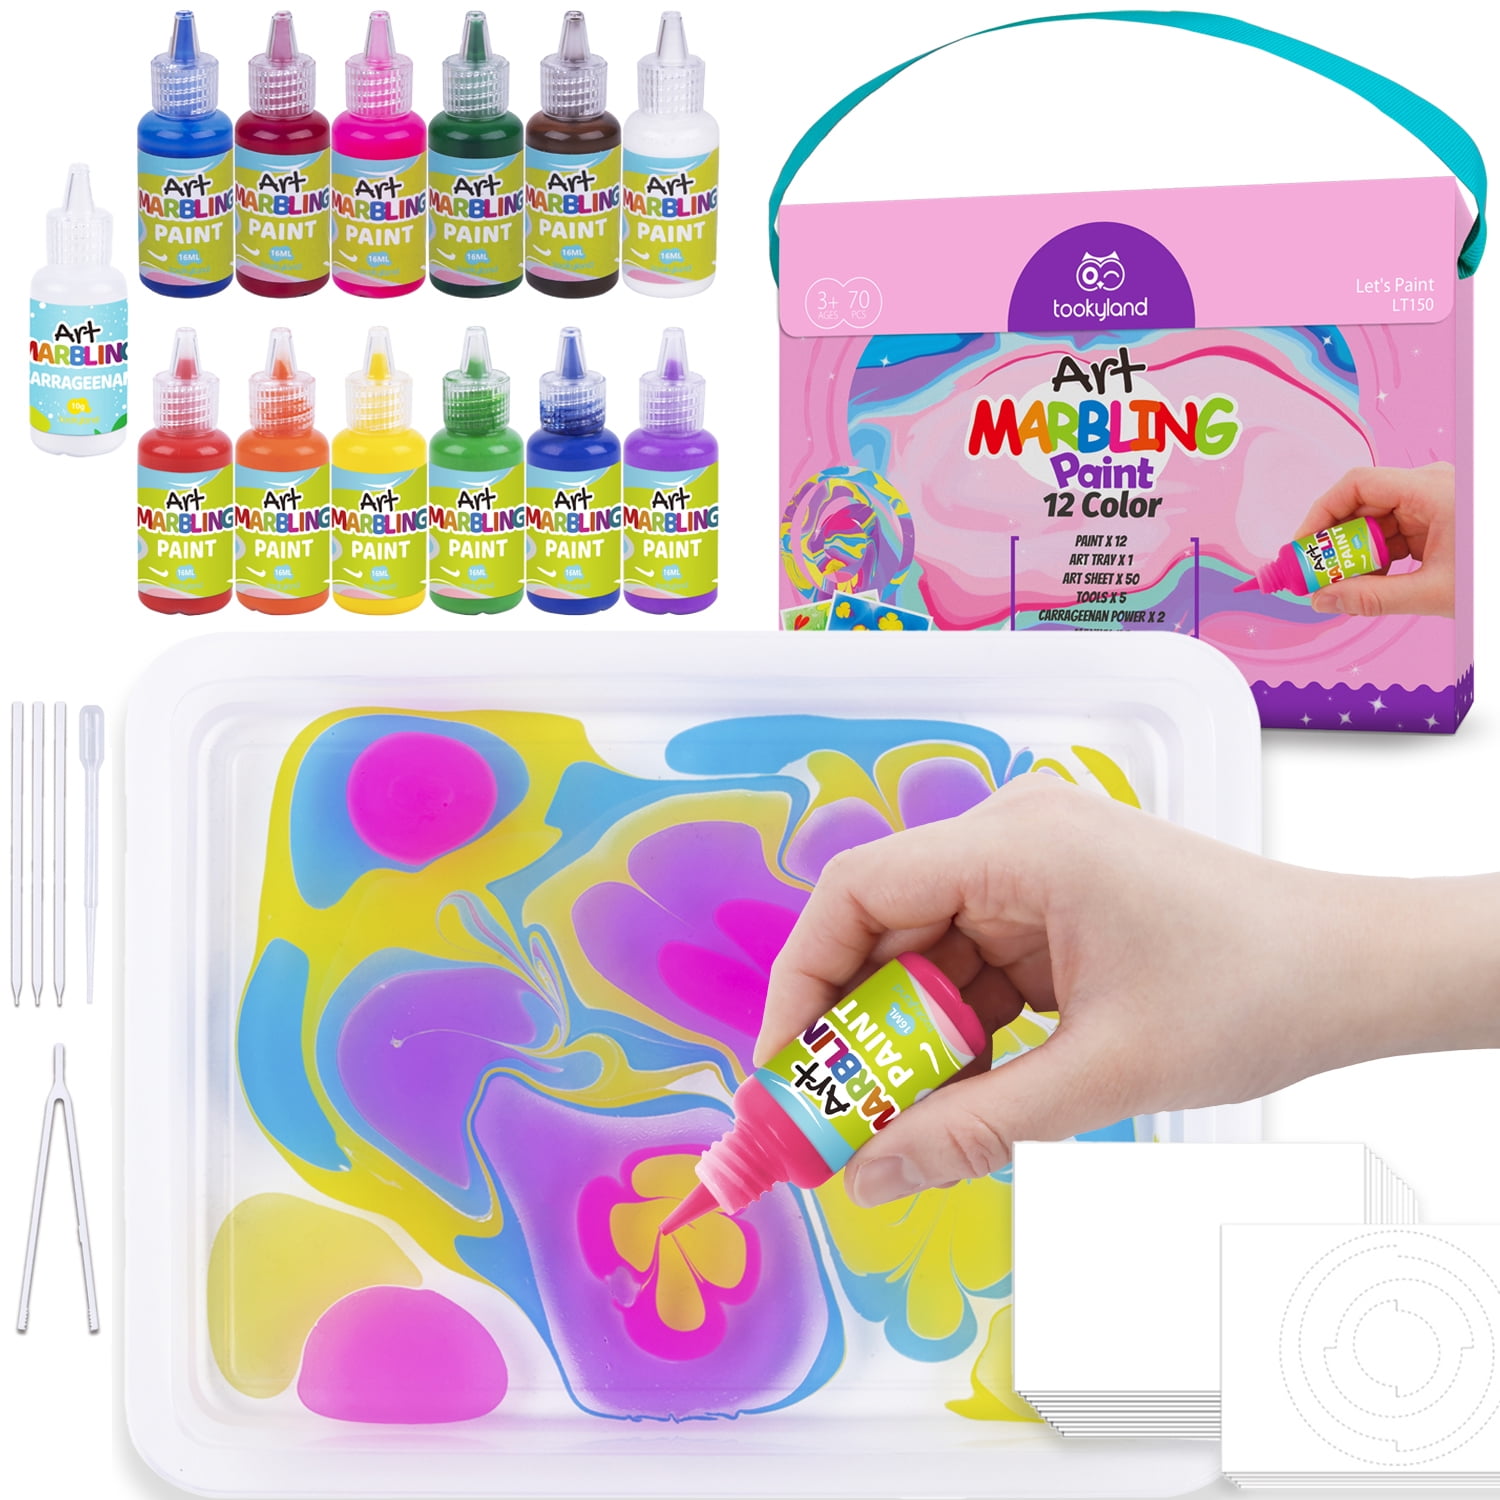 WATER MARBLING PAINT for Kids - Arts and Crafts for Kids, Marble painting  $38.36 - PicClick AU